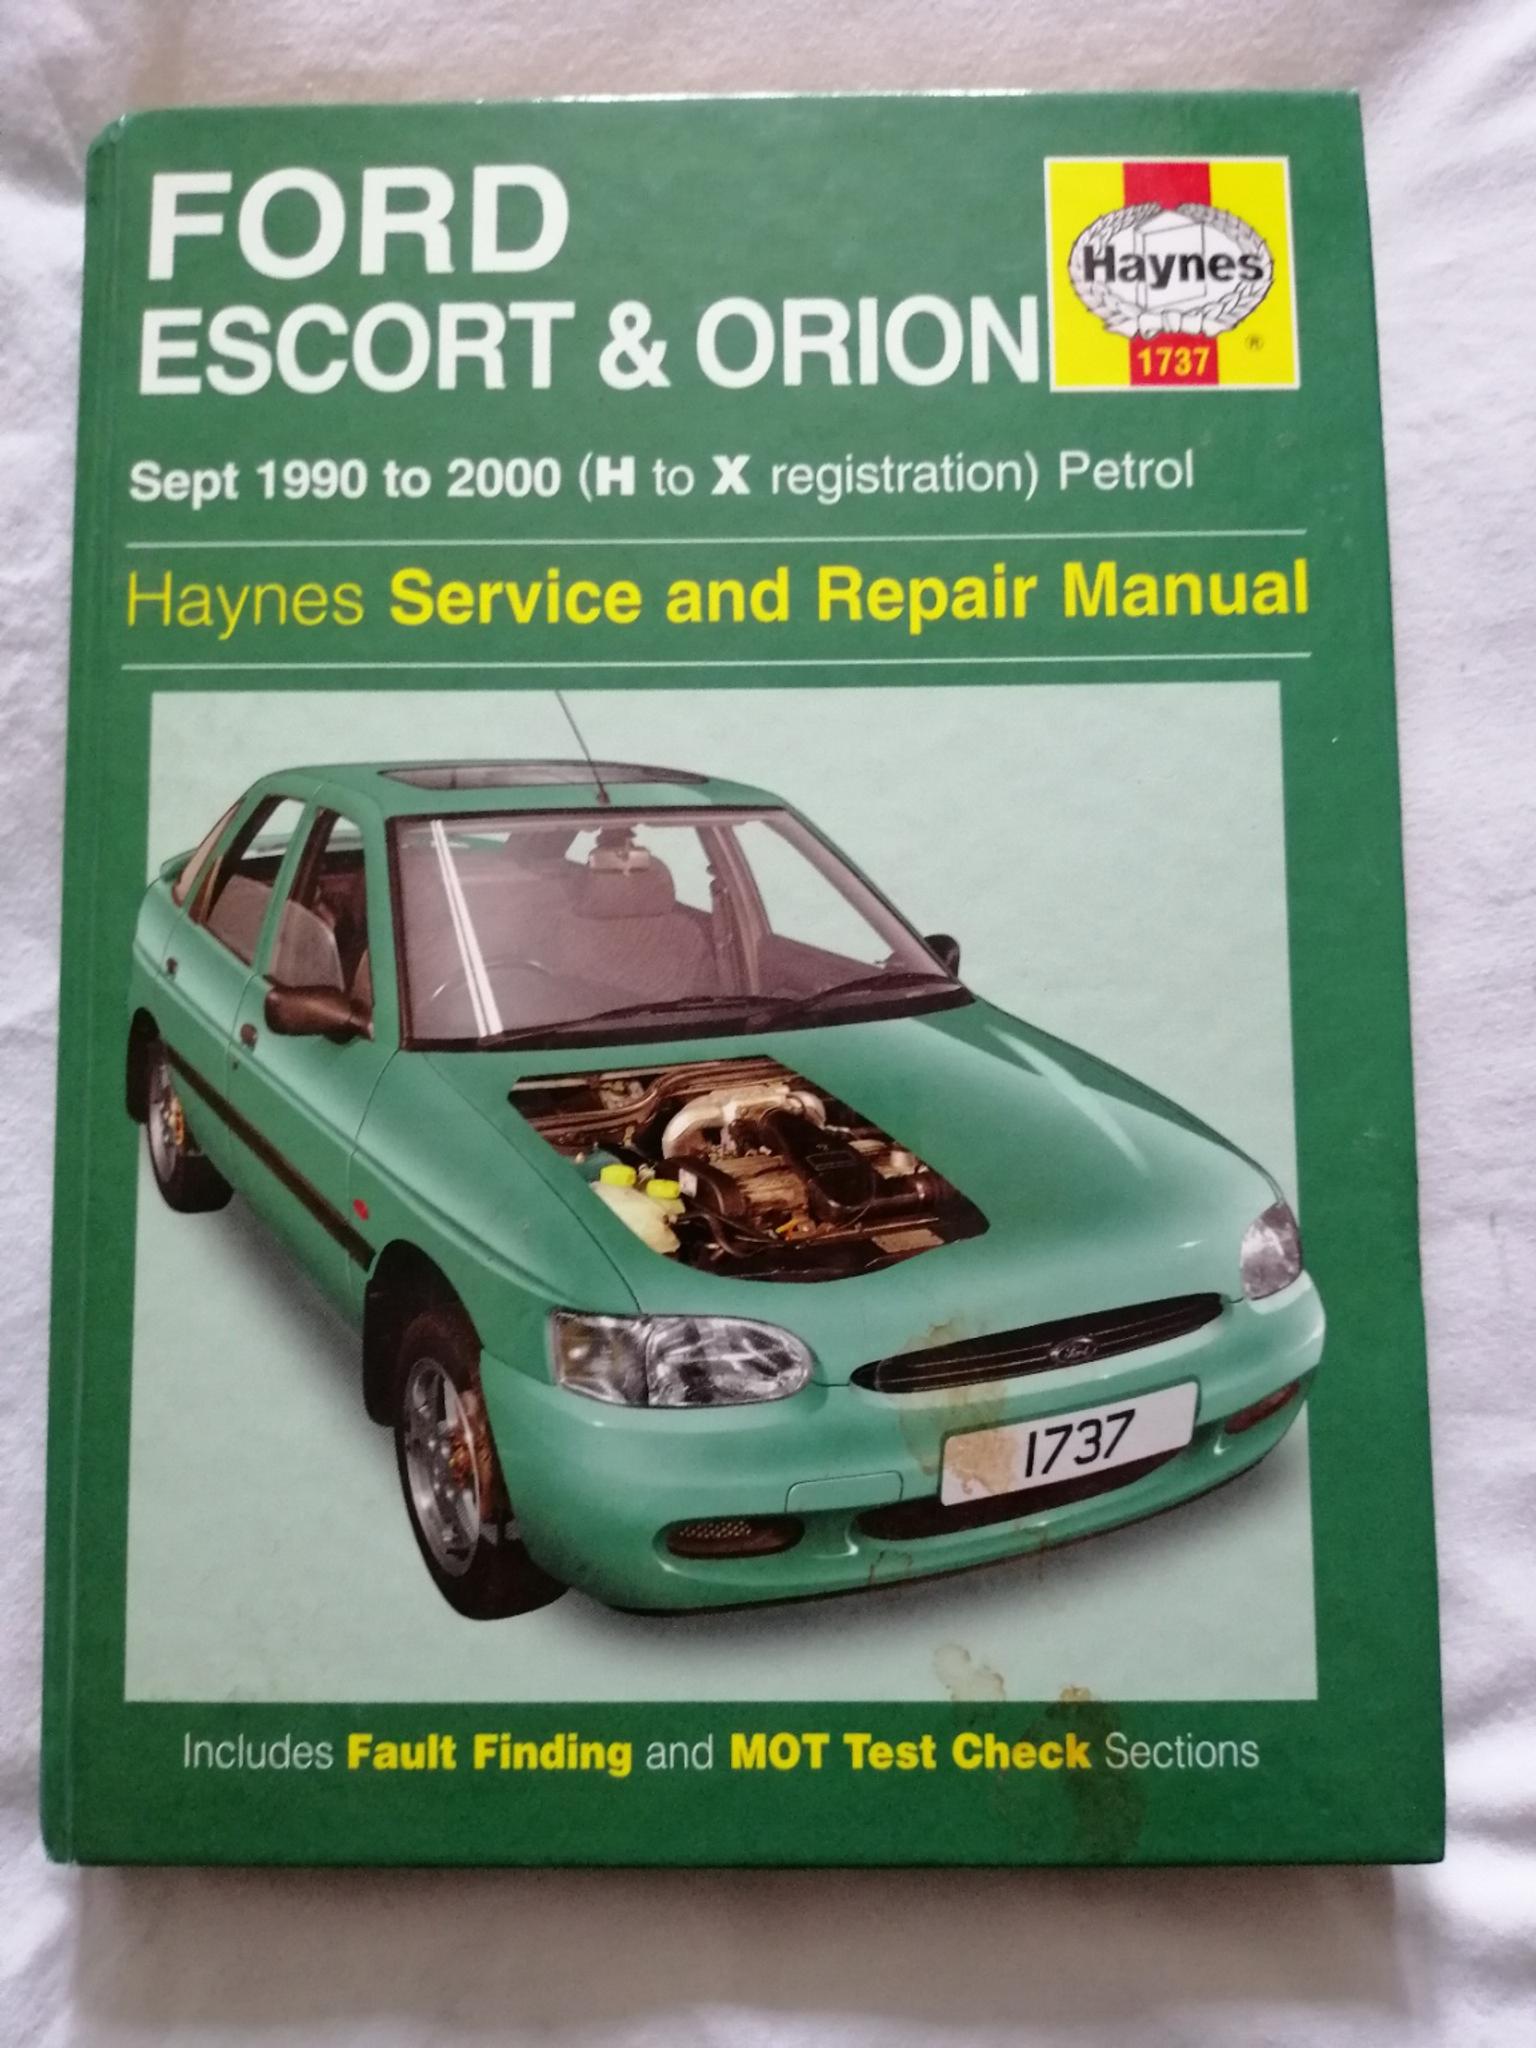 manual hayens free escort ford for